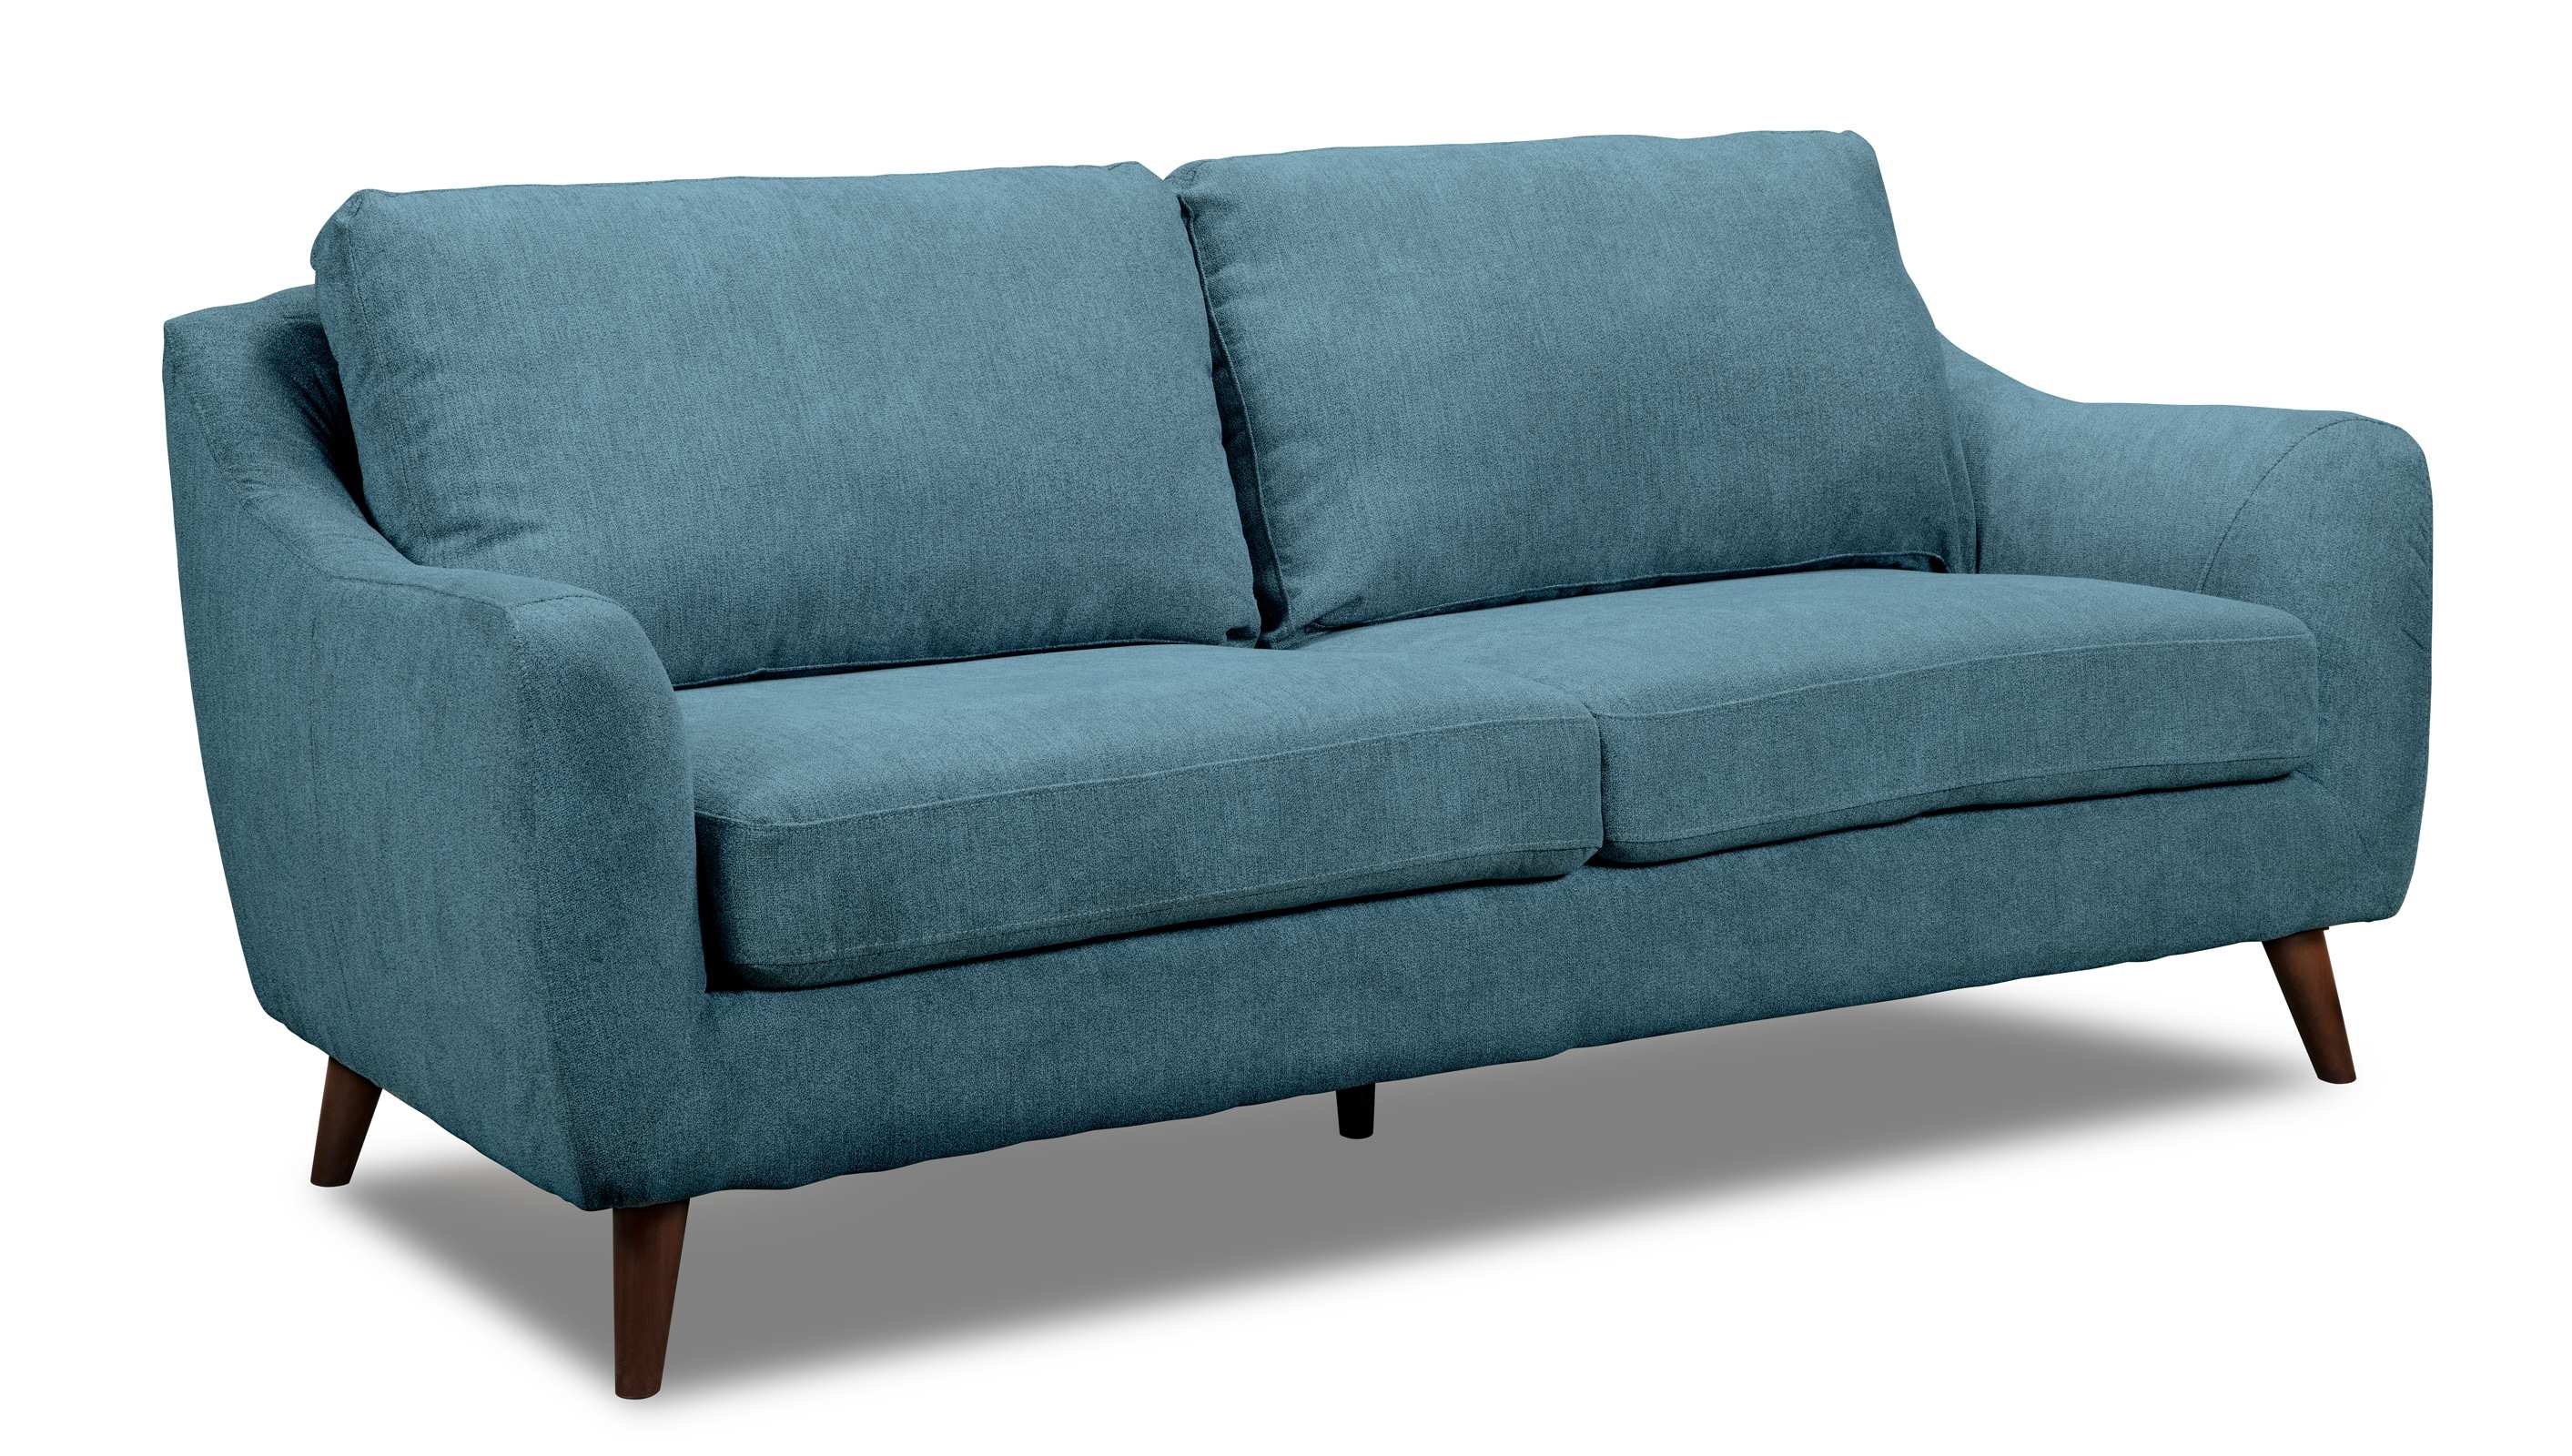 Kitchener seating collection Light Blue 9040